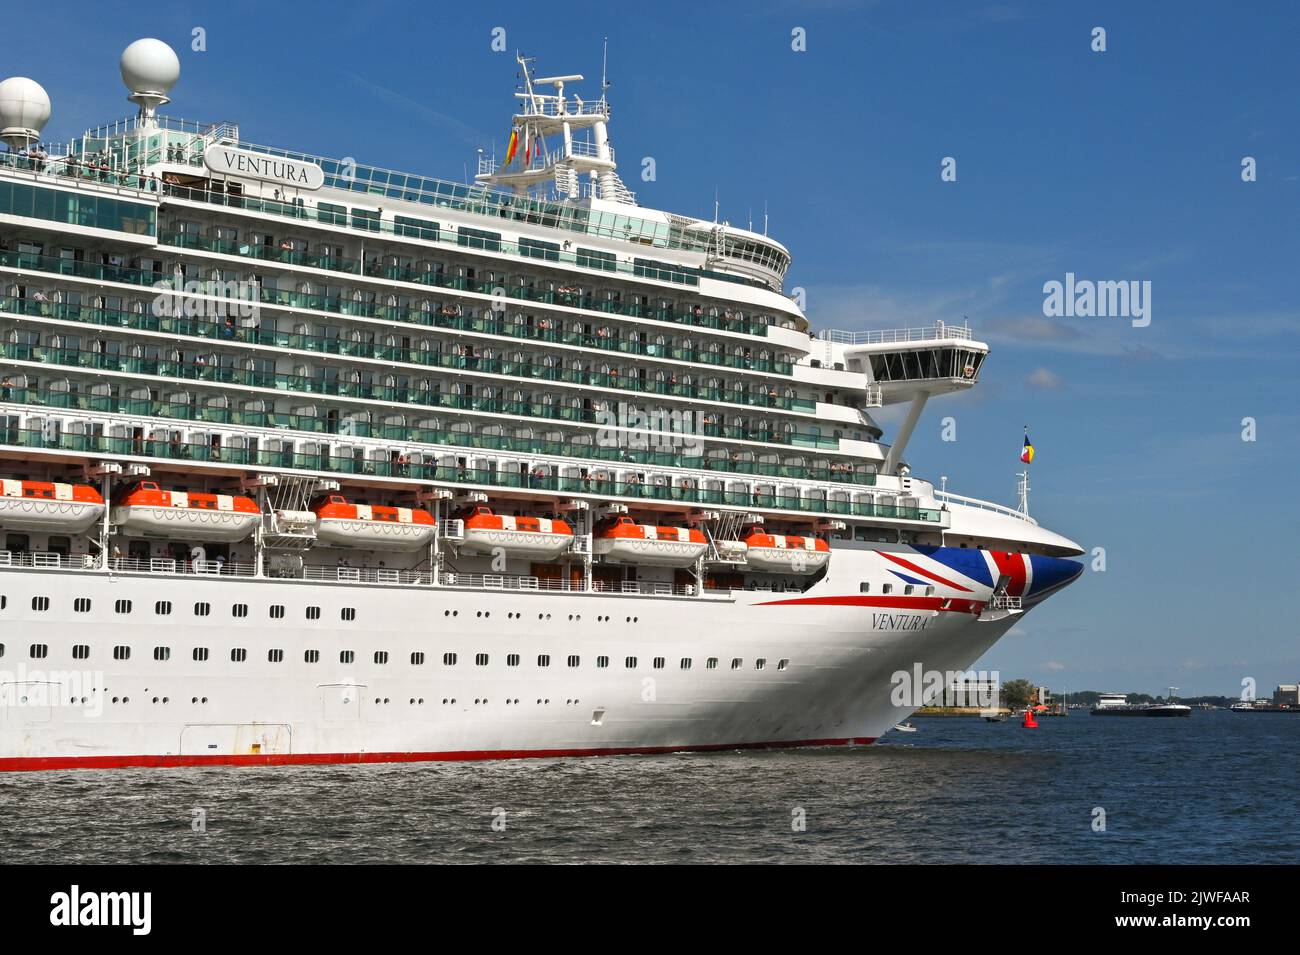 Amsterdam, Netherlands - August 2022: Large P&O cruise ship Ventura arriving in the port of Amsterdam Stock Photo